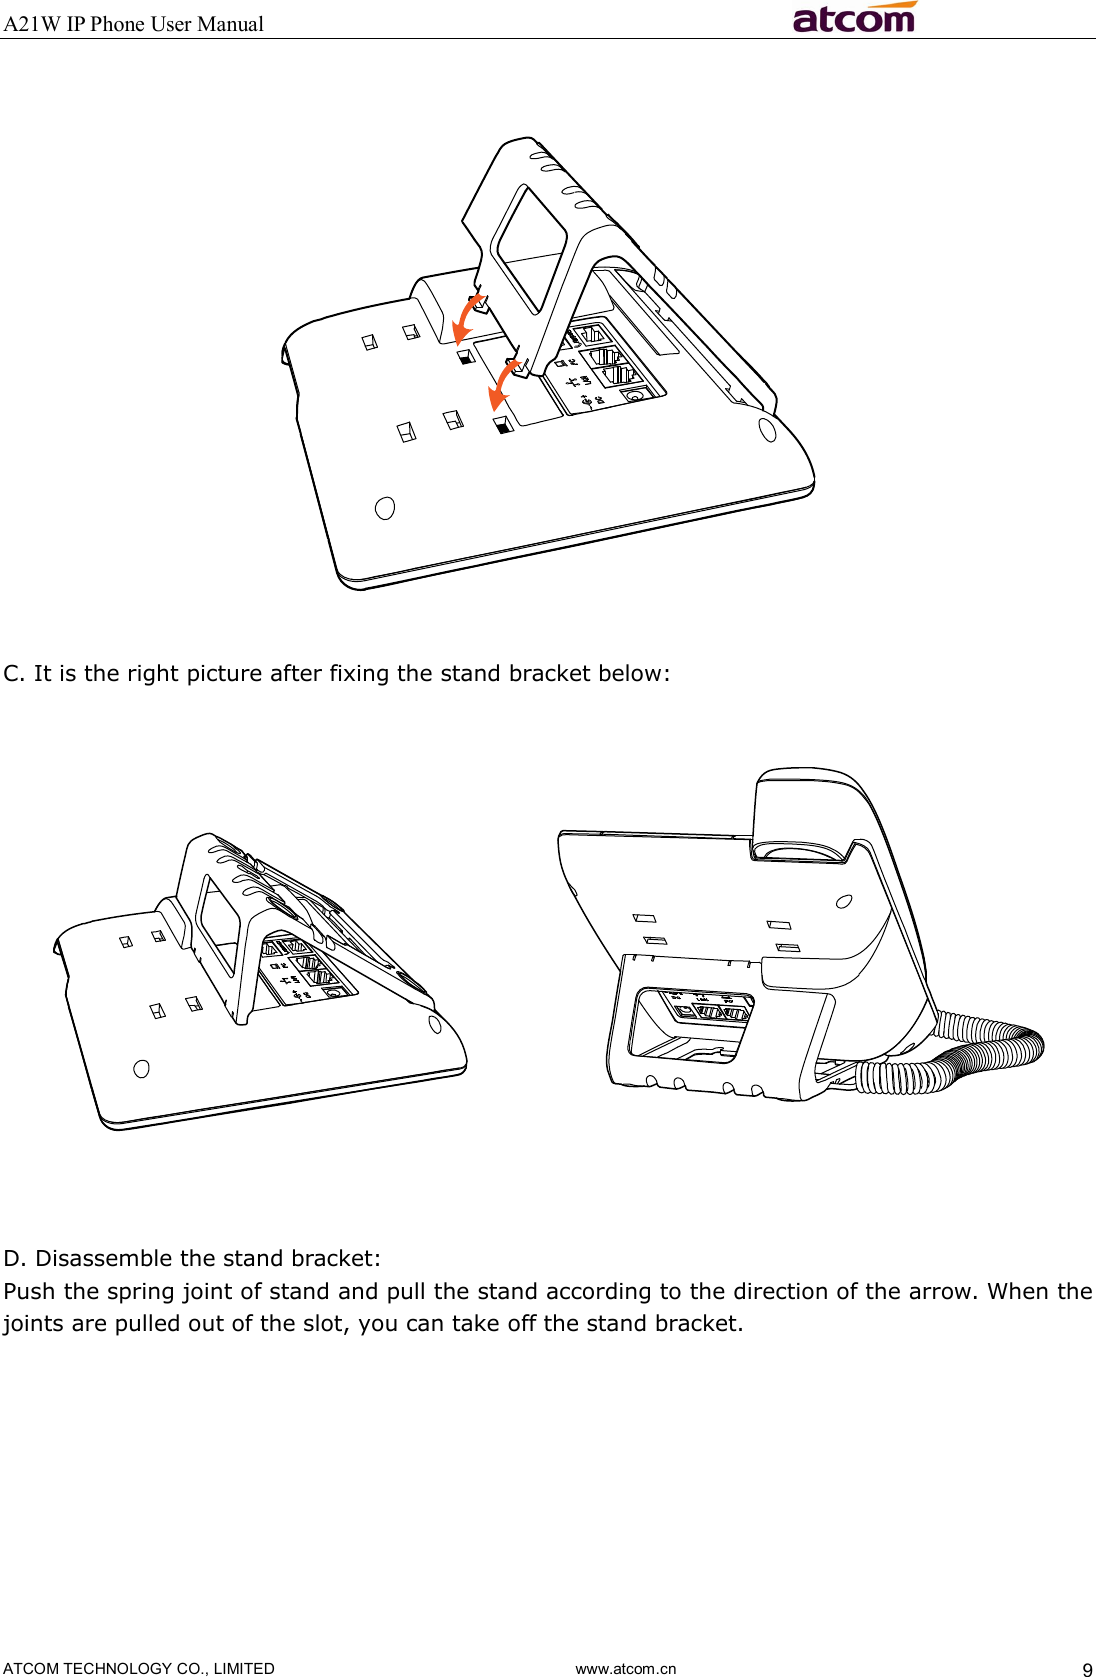 A21W IP Phone User Manual                                                          ATCOM TECHNOLOGY CO., LIMITED                              www.atcom.cn  9       C. It is the right picture after fixing the stand bracket below:       D. Disassemble the stand bracket: Push the spring joint of stand and pull the stand according to the direction of the arrow. When the joints are pulled out of the slot, you can take off the stand bracket.         